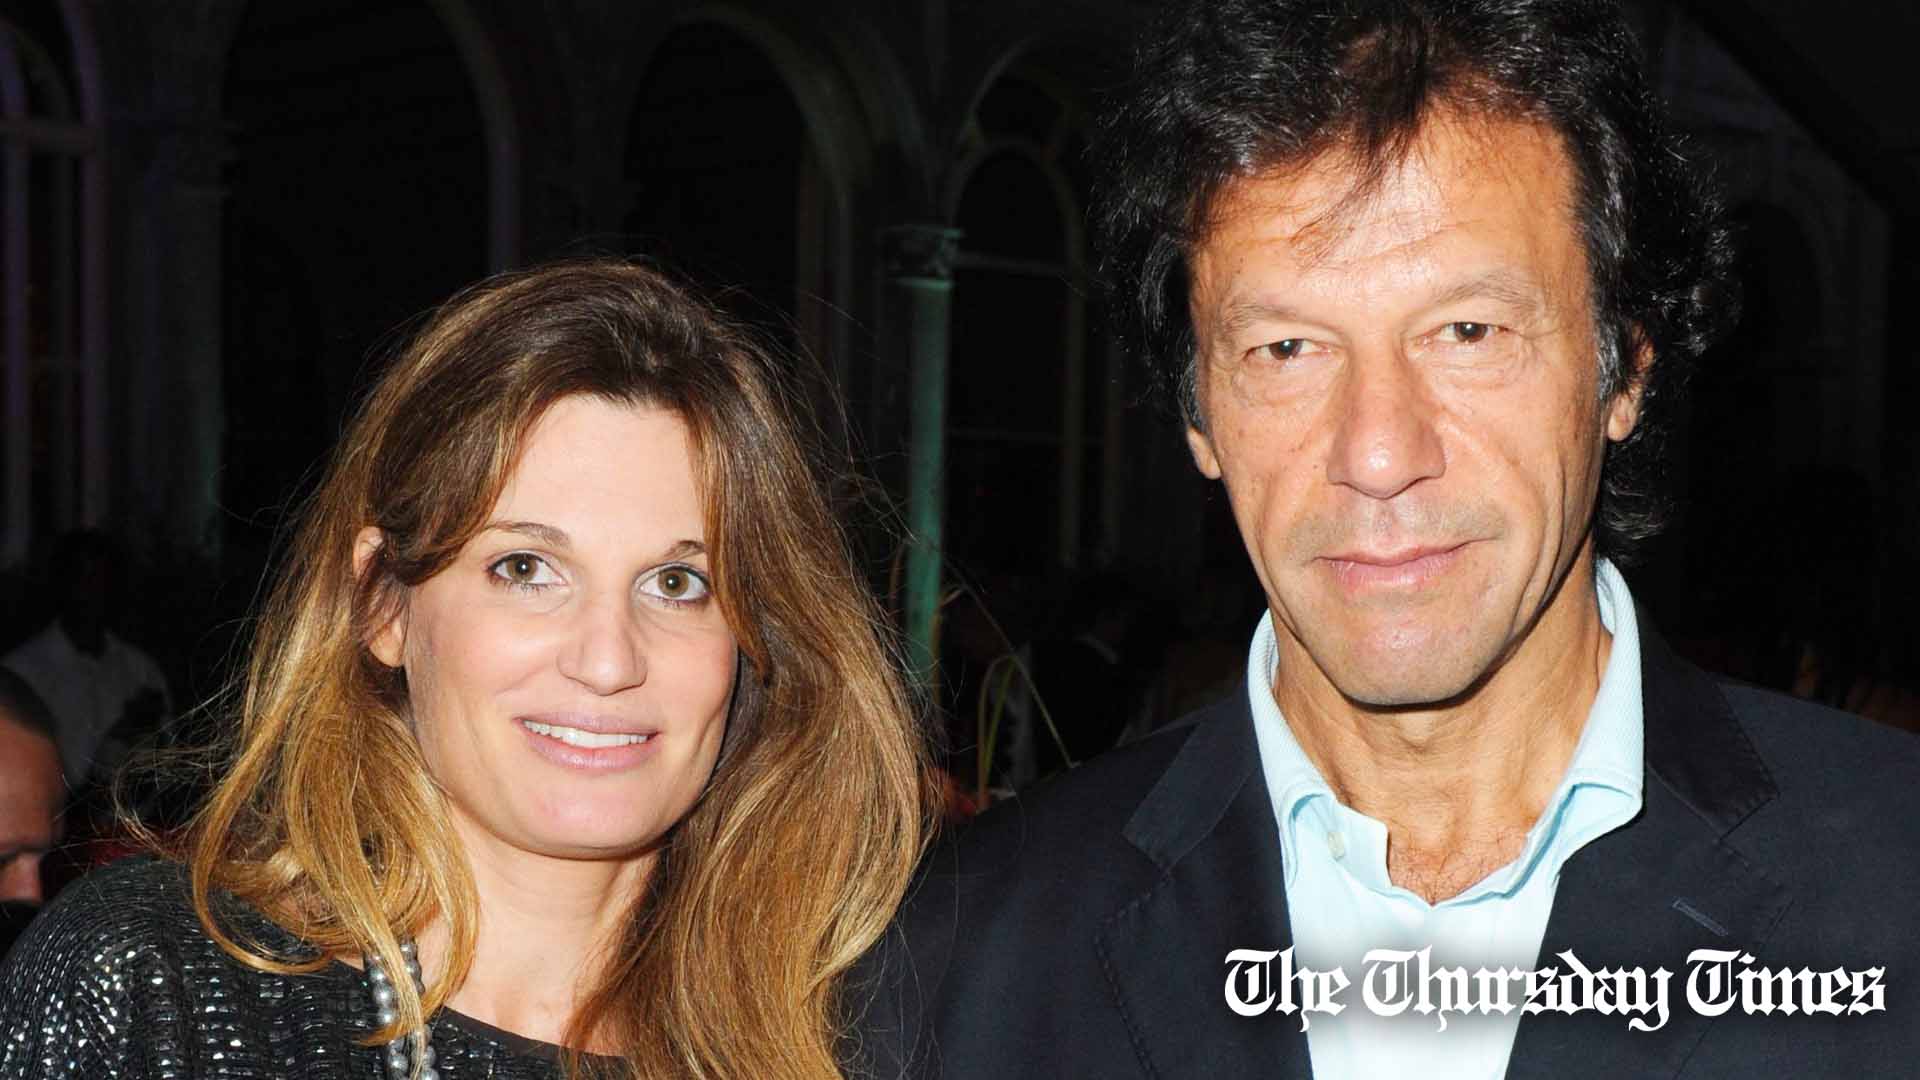 A file photo is shown of British journalist Jemima Khan (L) and former Pakistani prime minister Imran Khan (R) at London in 2010. — FILE/THE THURSDAY TIMES